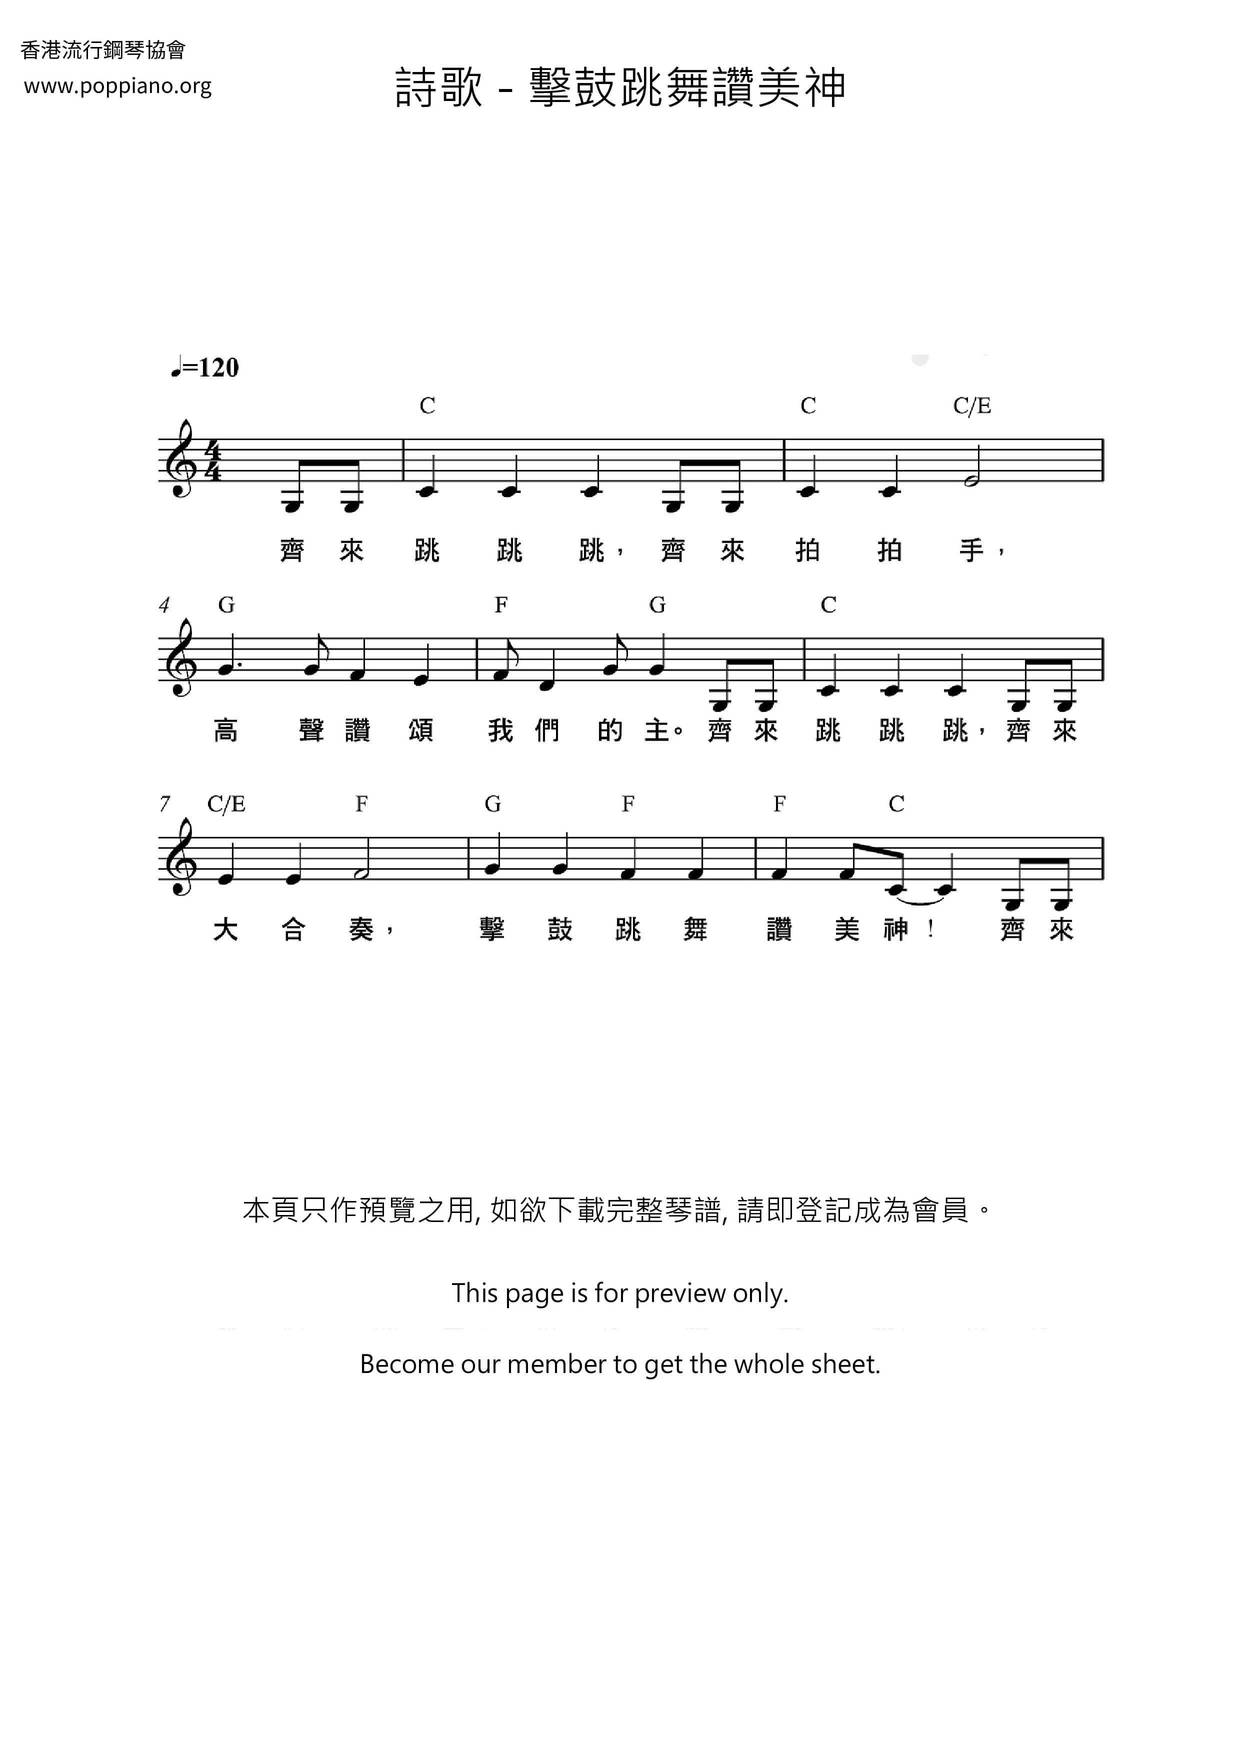 Praise God By Drumming And Dancing Score